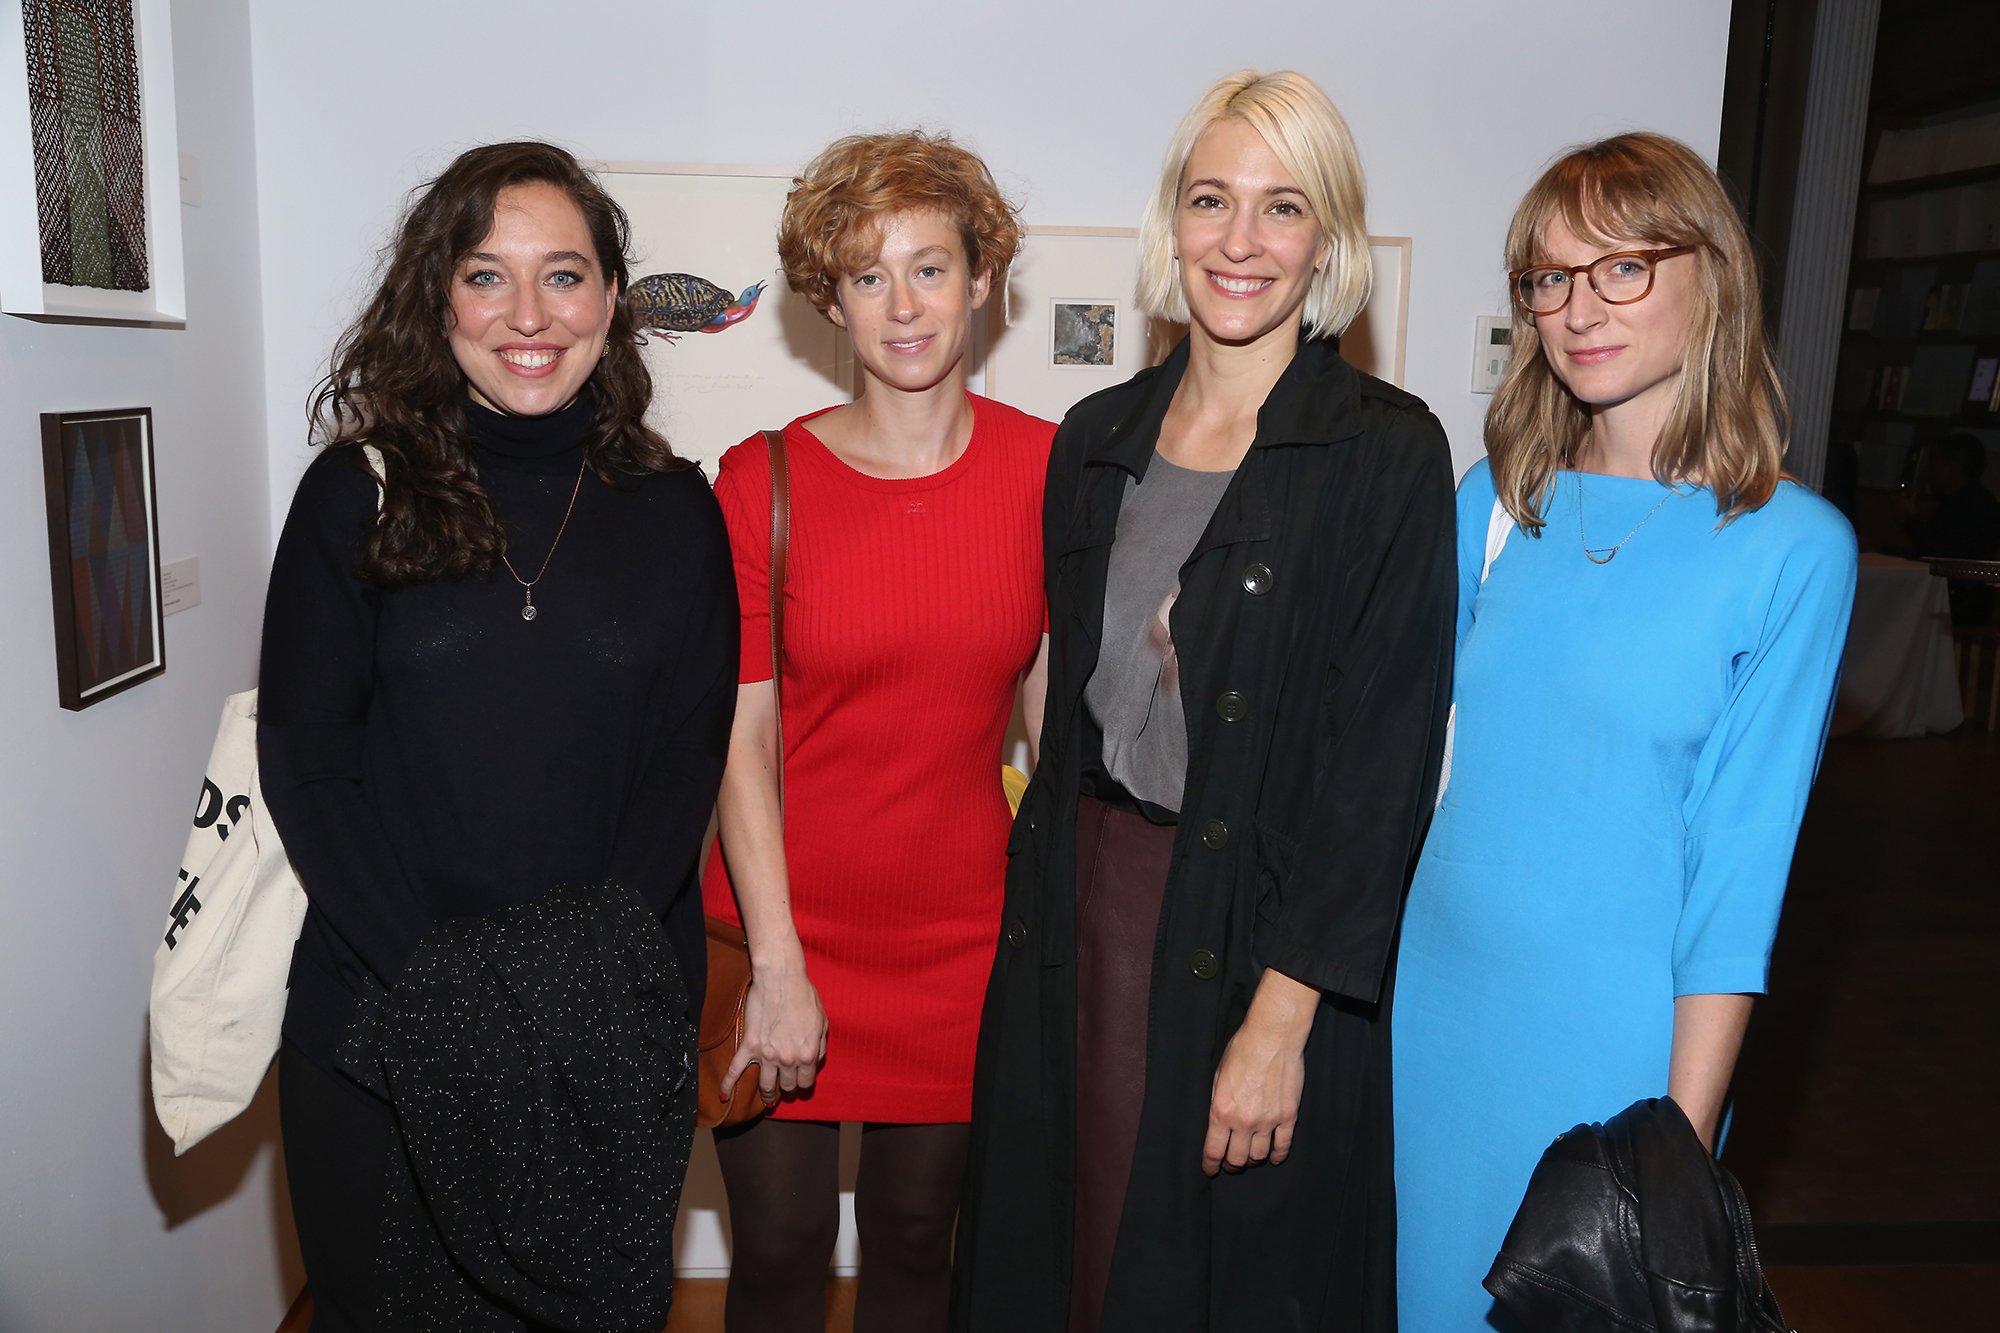 Julia Bland, Sarah Faux, Candice Nadey, and Kristen Wawruck at the Drawing Center Annual Benefit Auction. Courtesy of photographer Sylvain Gaboury, © Patrick McMullan.